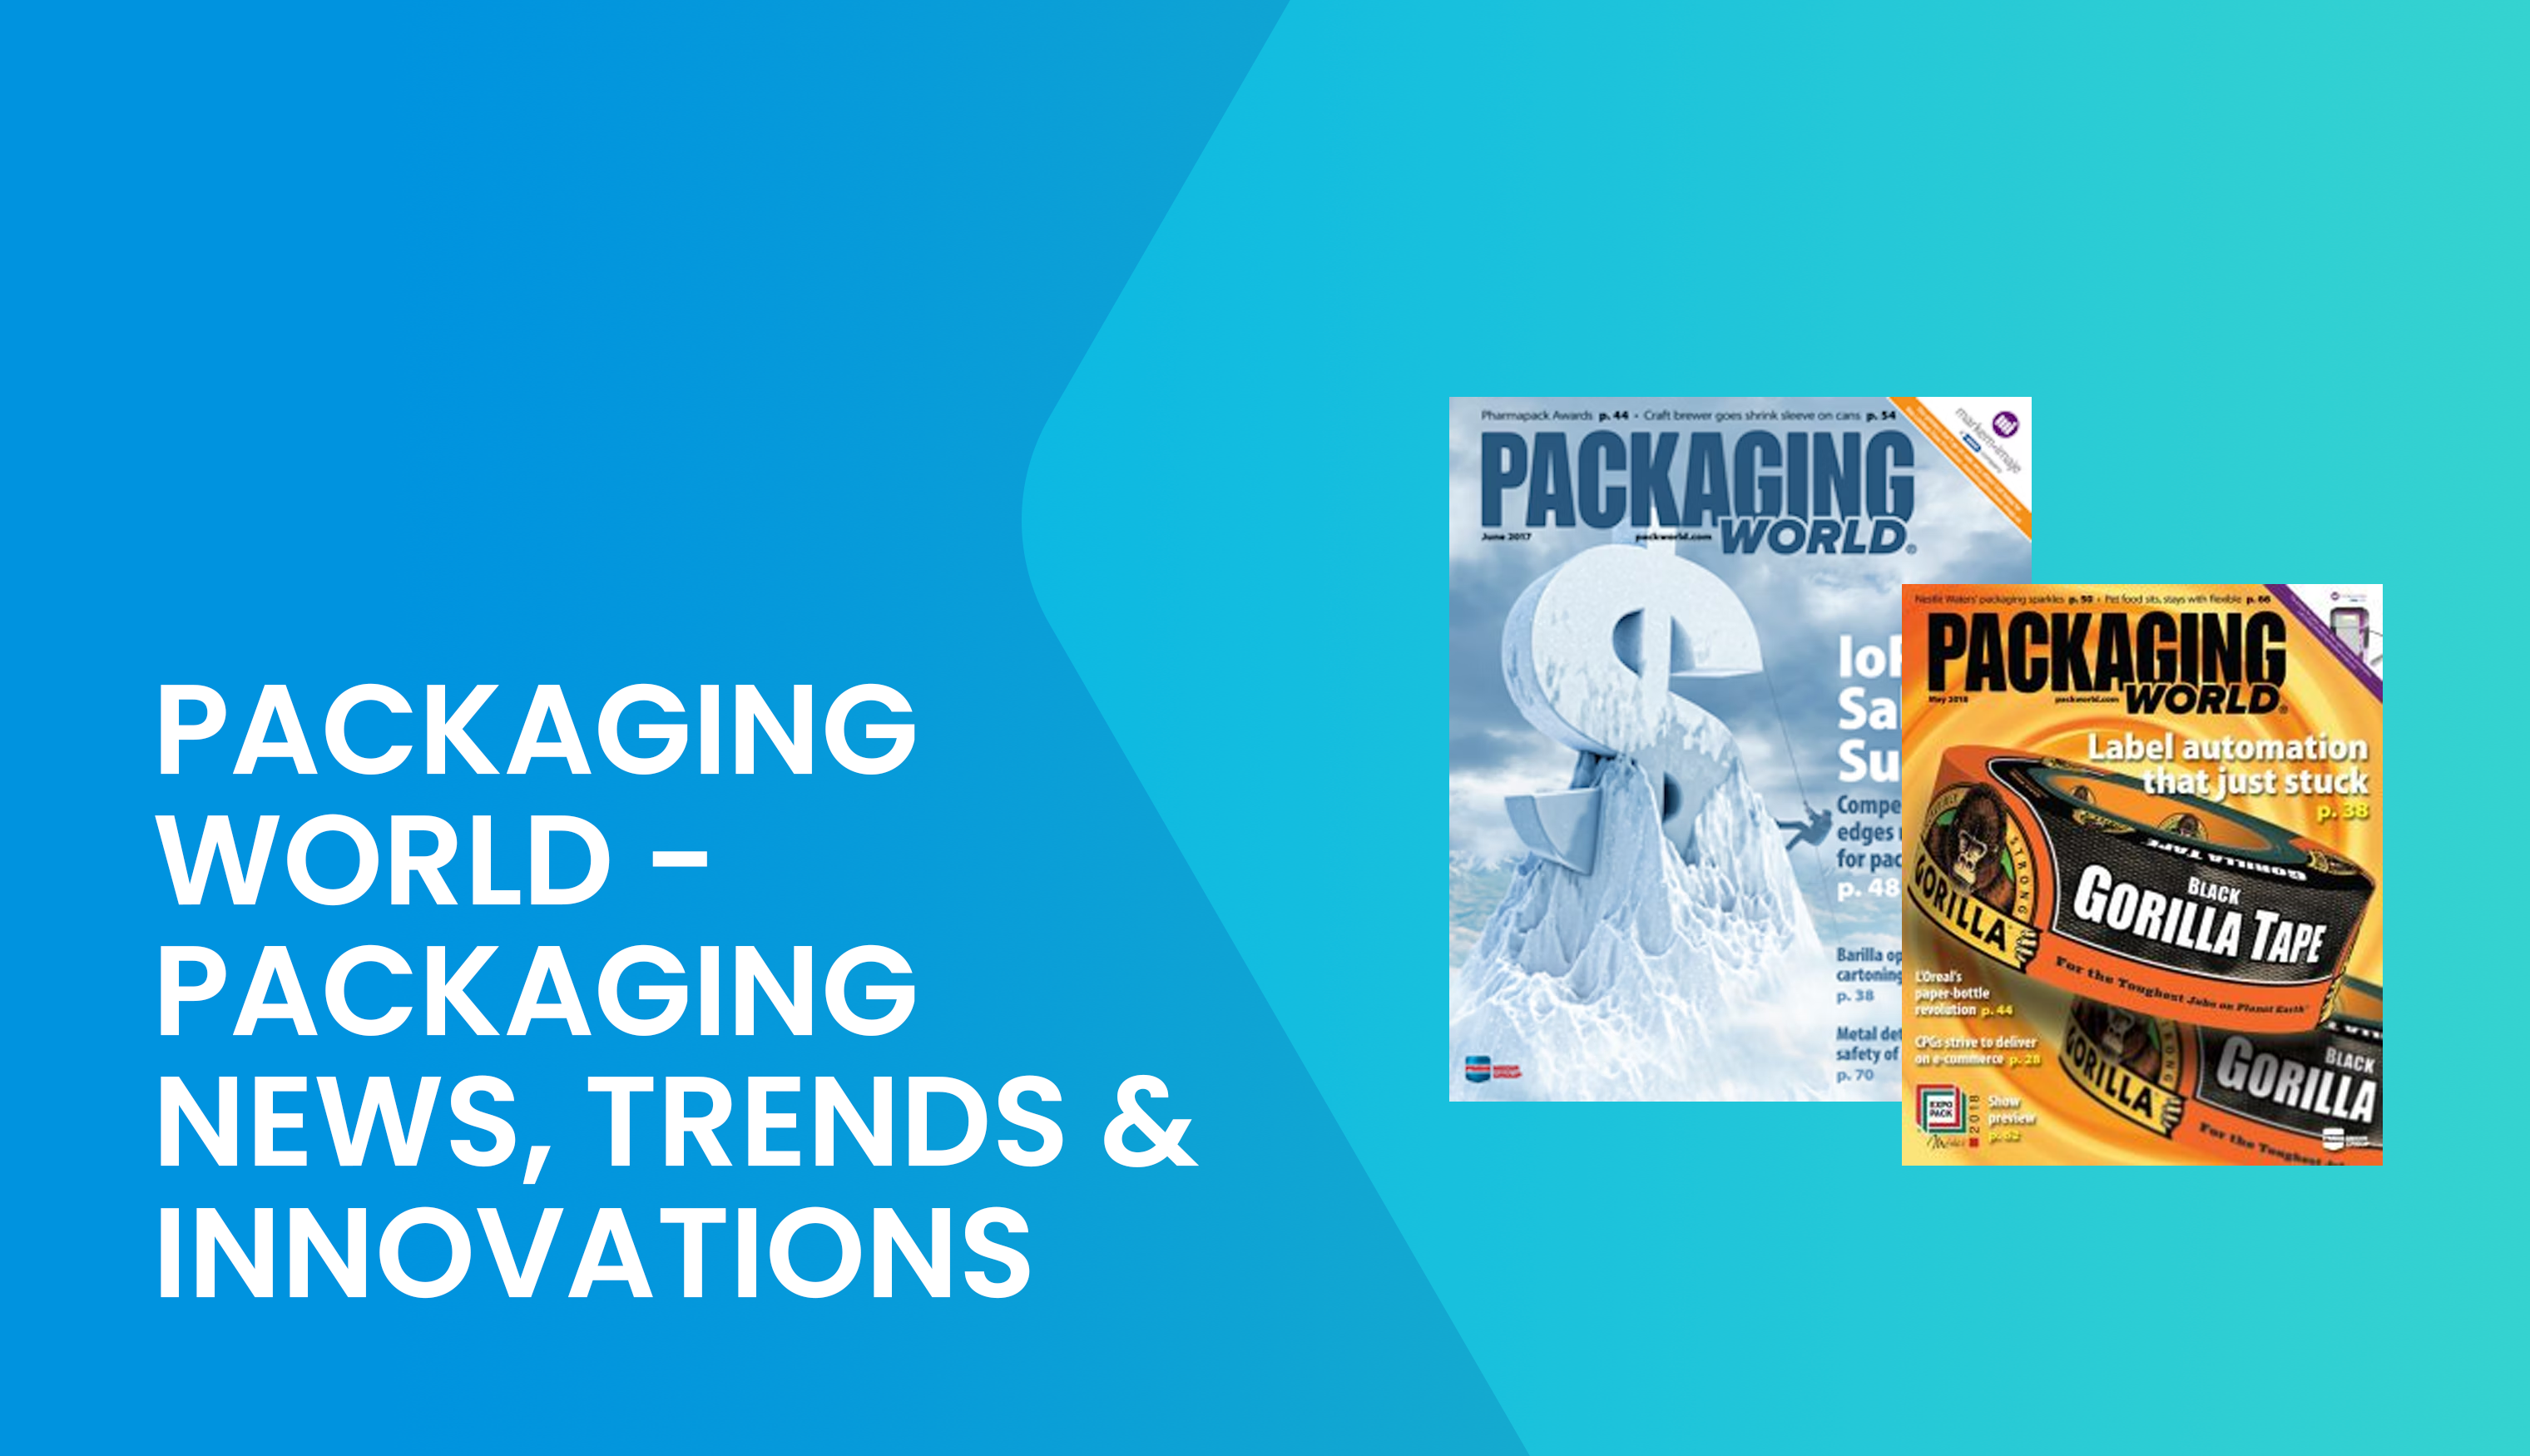 Packaging World - Packaging News, Trends & Innovations